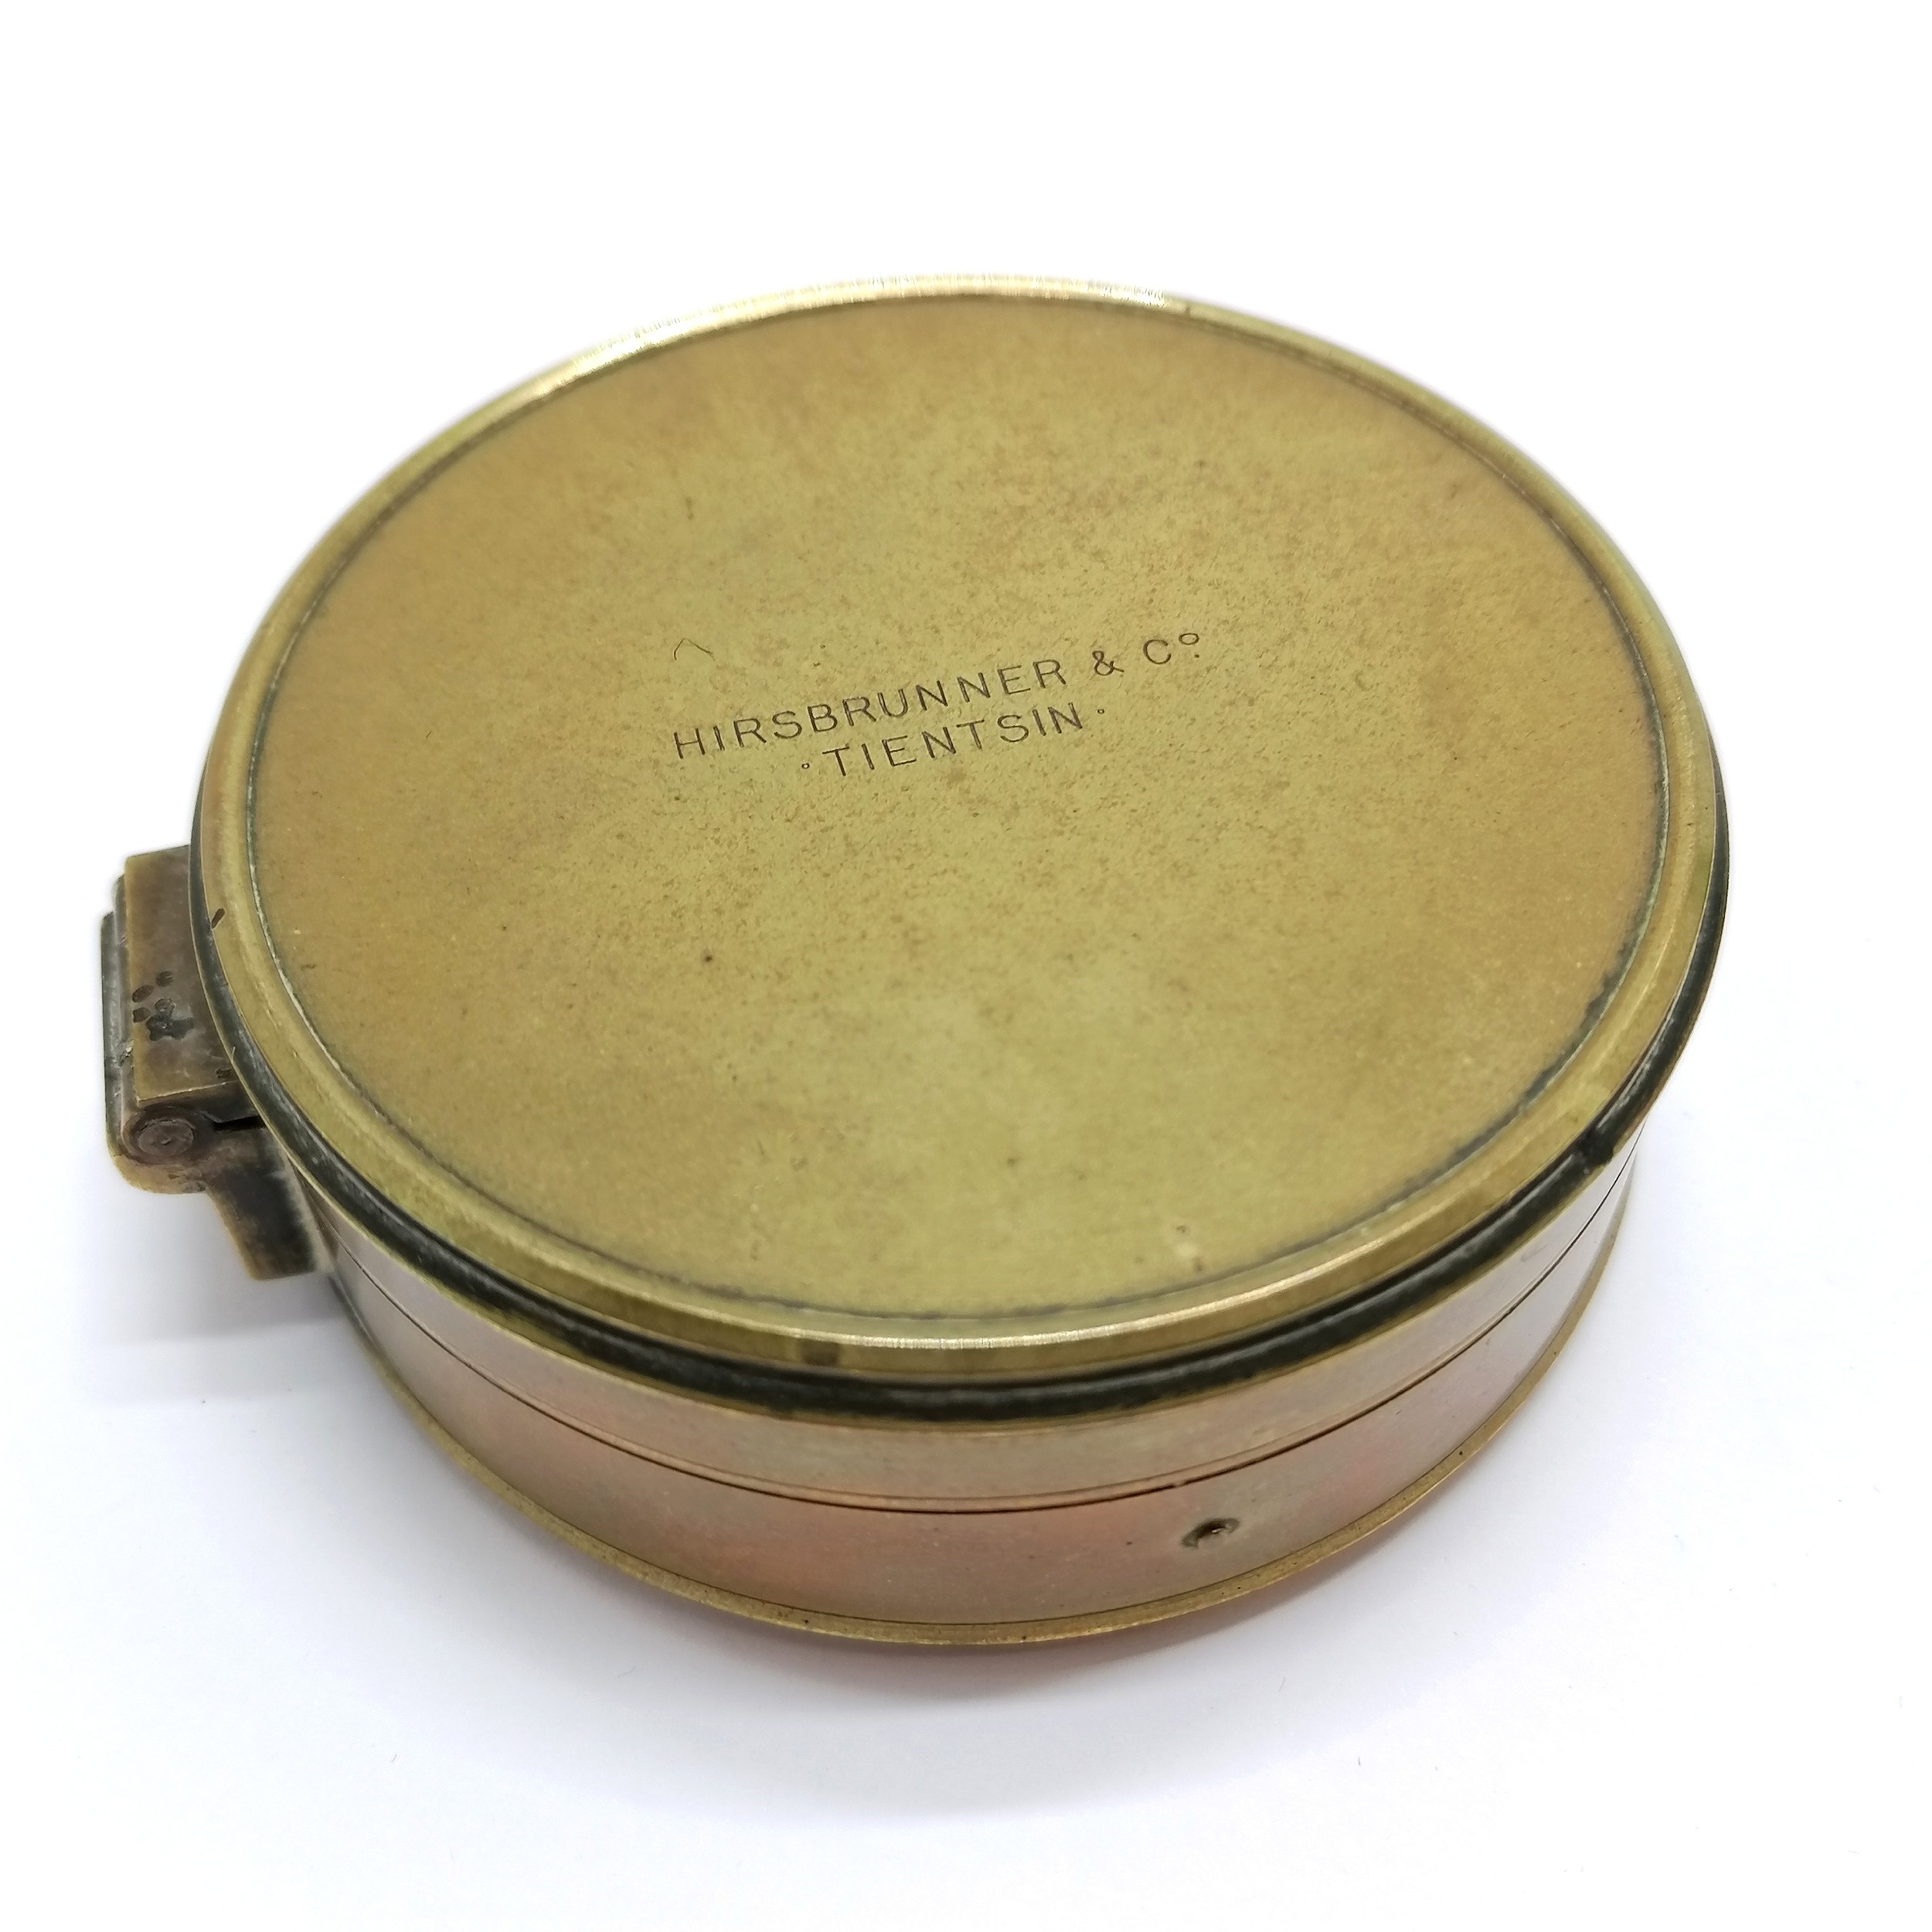 Antique prismatic compass (7.4cm diameter & missing lens) retailed by Hirsbrunner & Co (Tientsin) in - Image 5 of 5